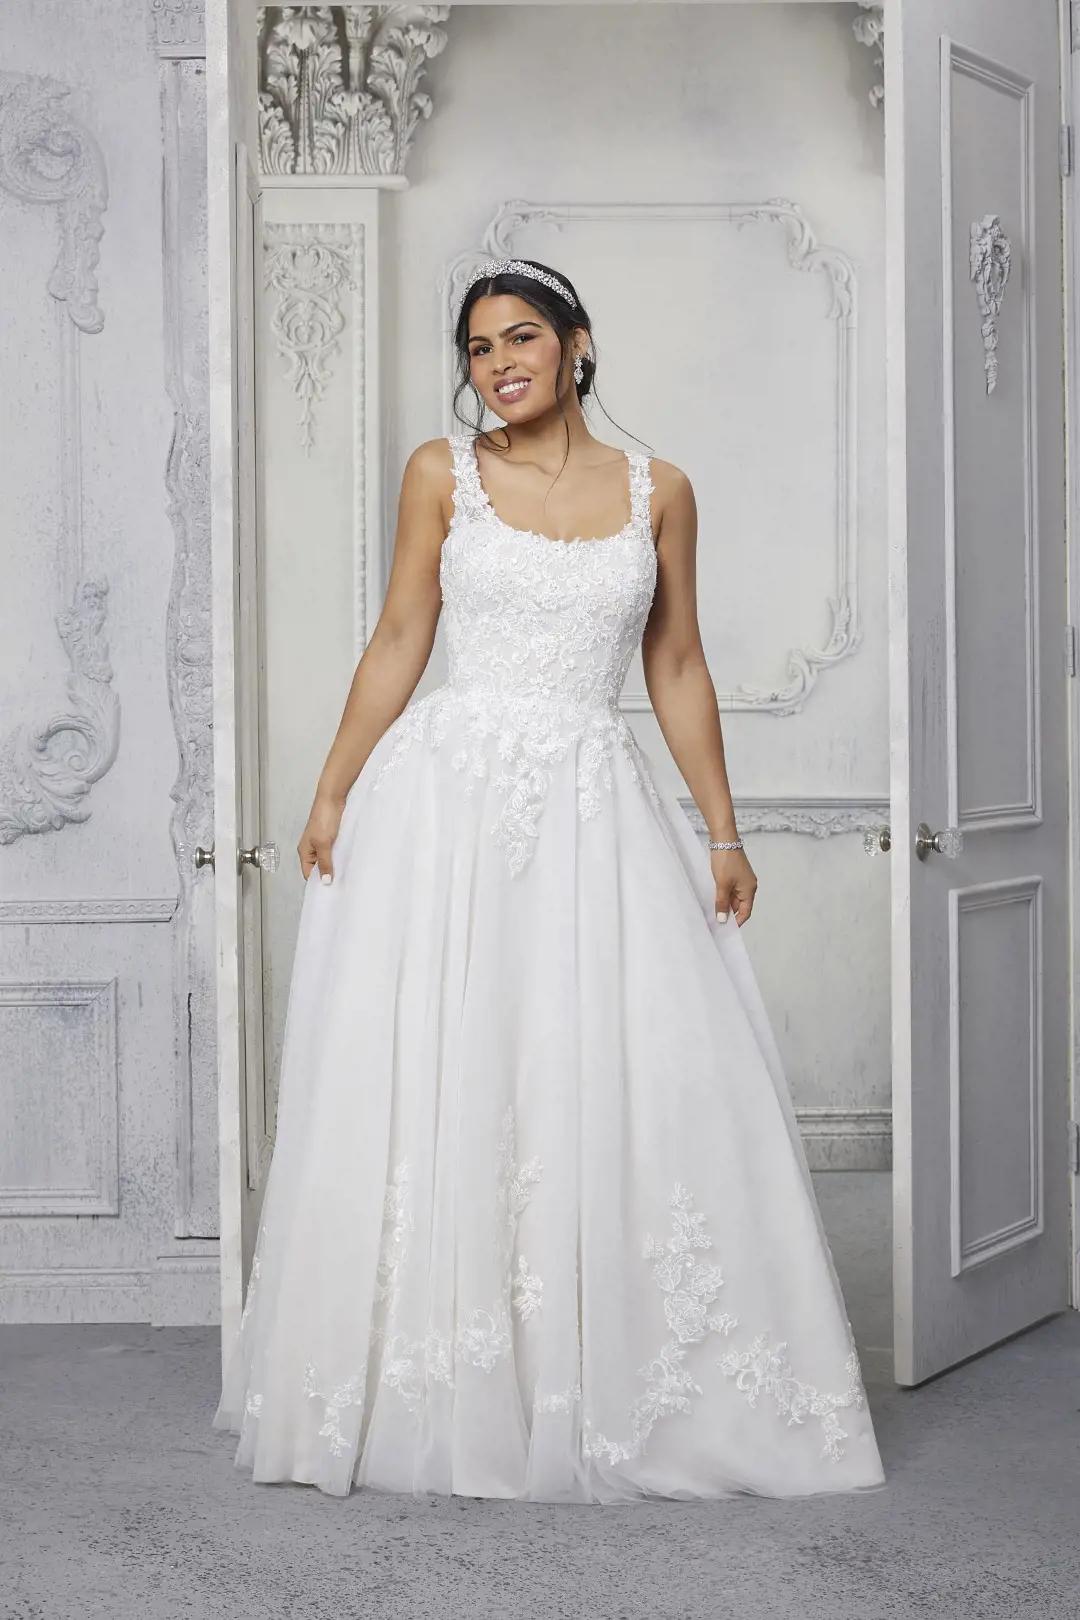 Choosing the Best Wedding Dress Based on Your Body Type Image